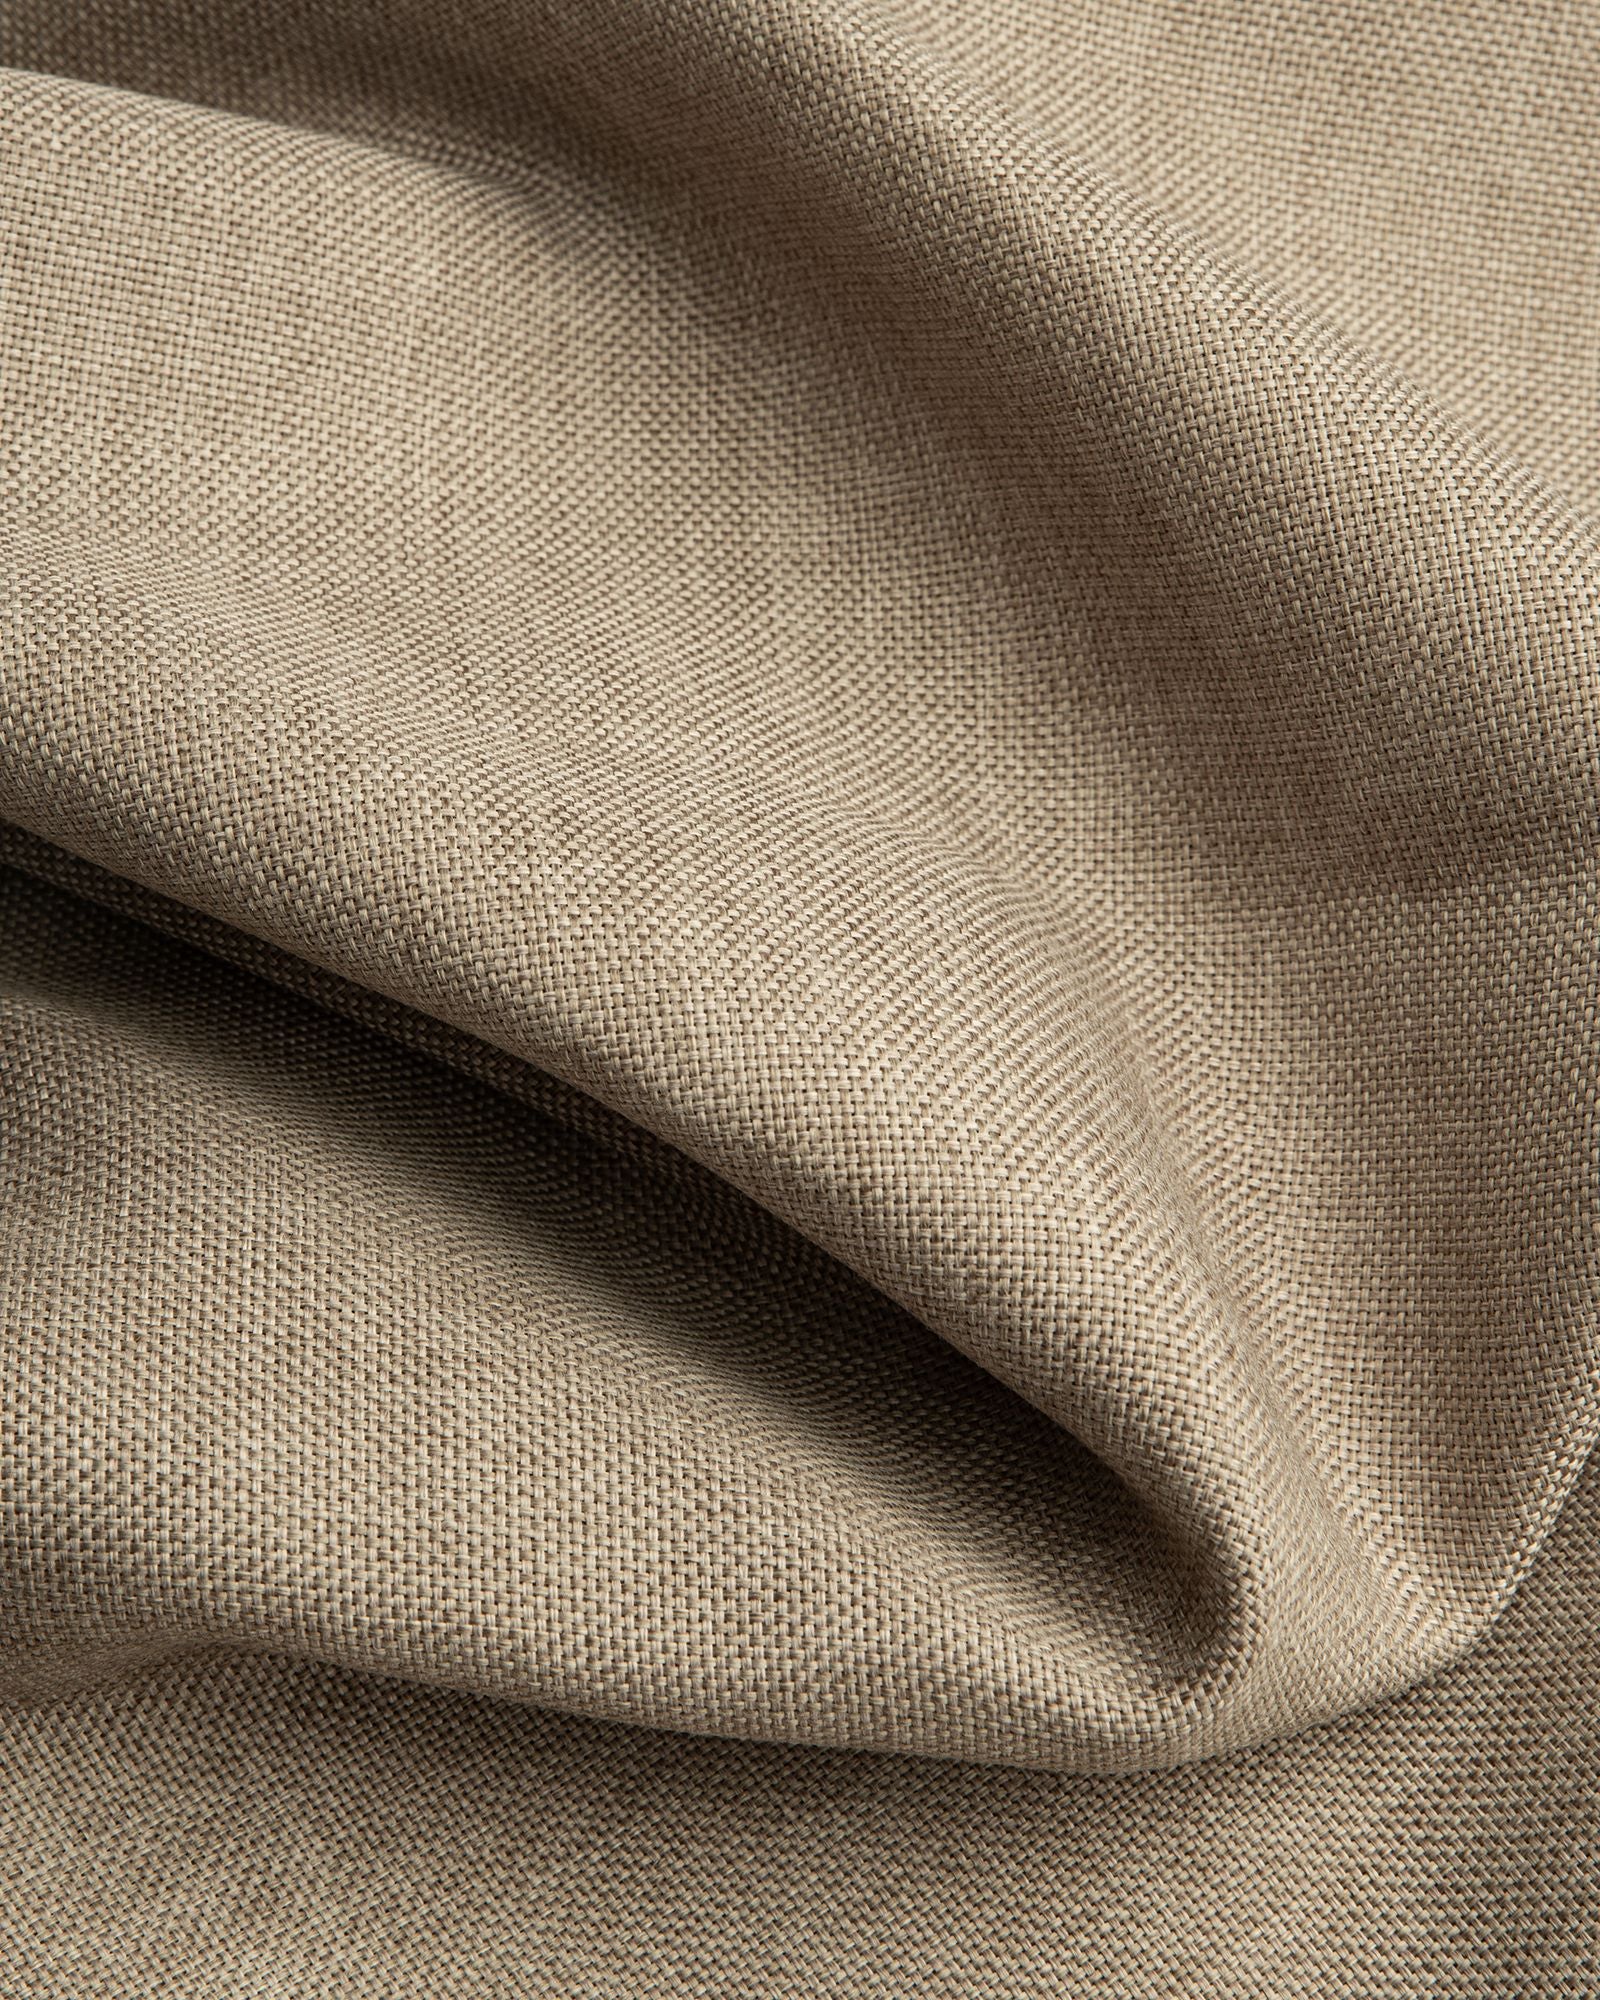 Größe: 130x 220 cm Farbe: taupe #farbe_taupe